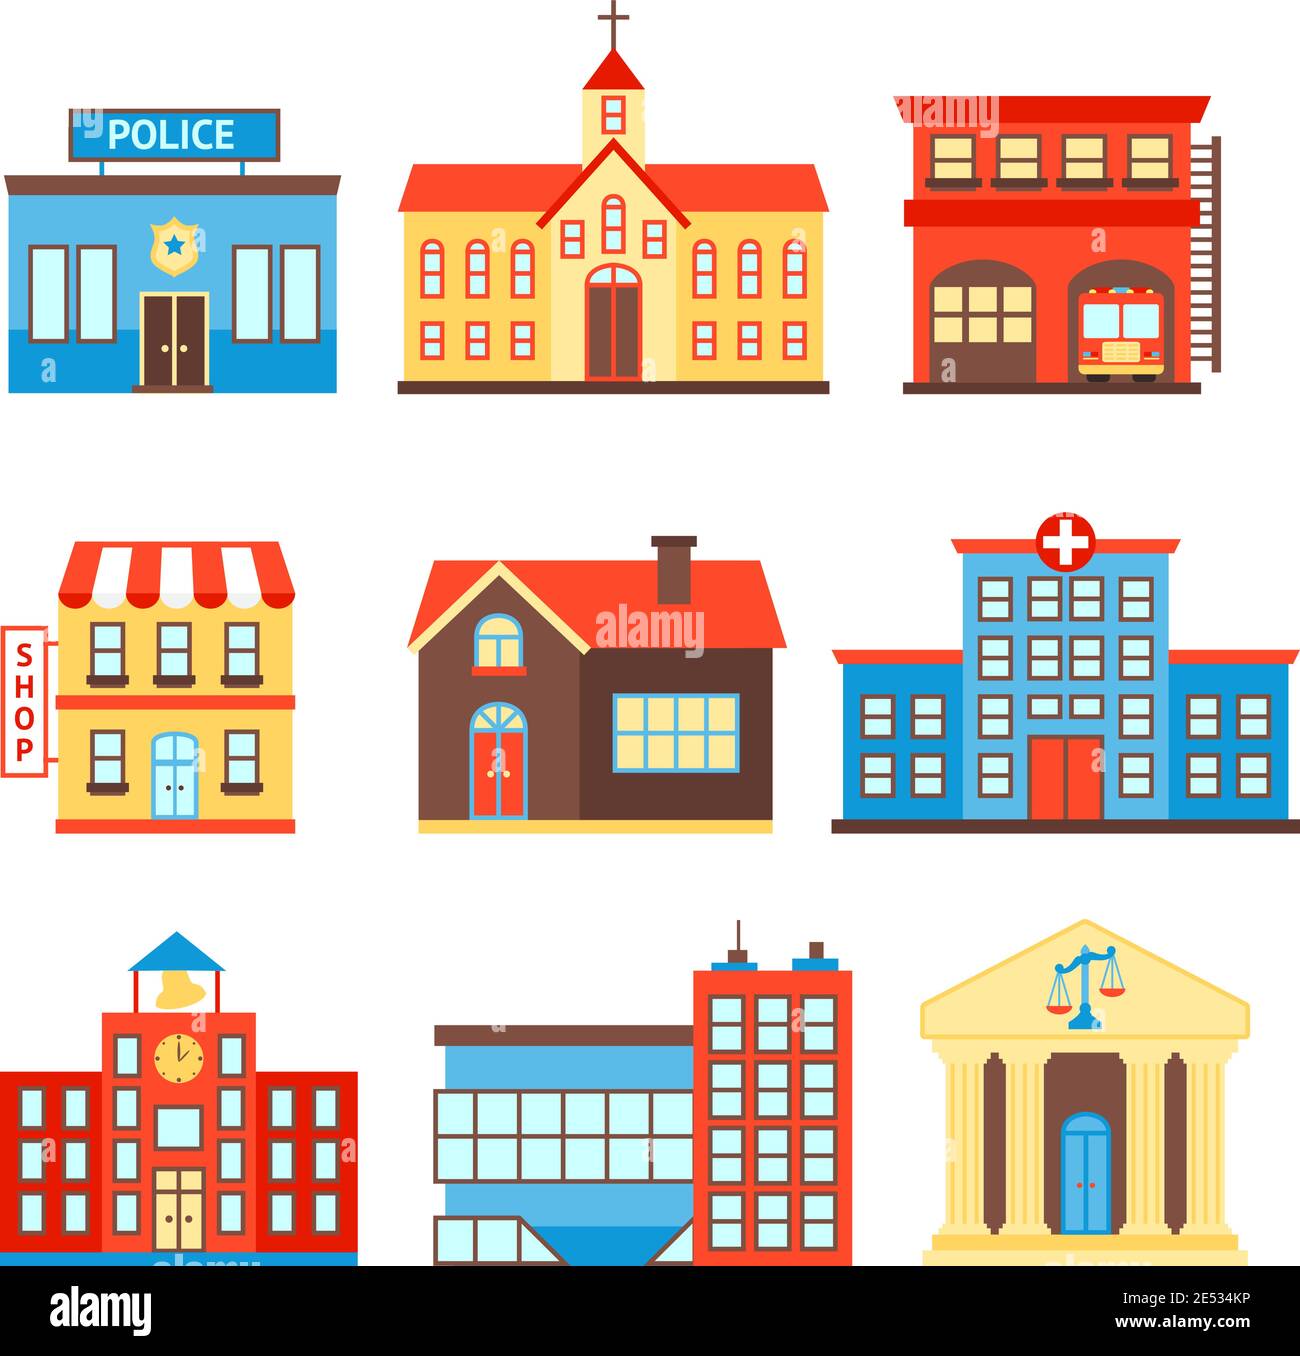 Government building icons set of police shop church isolated vector illustration Stock Vector